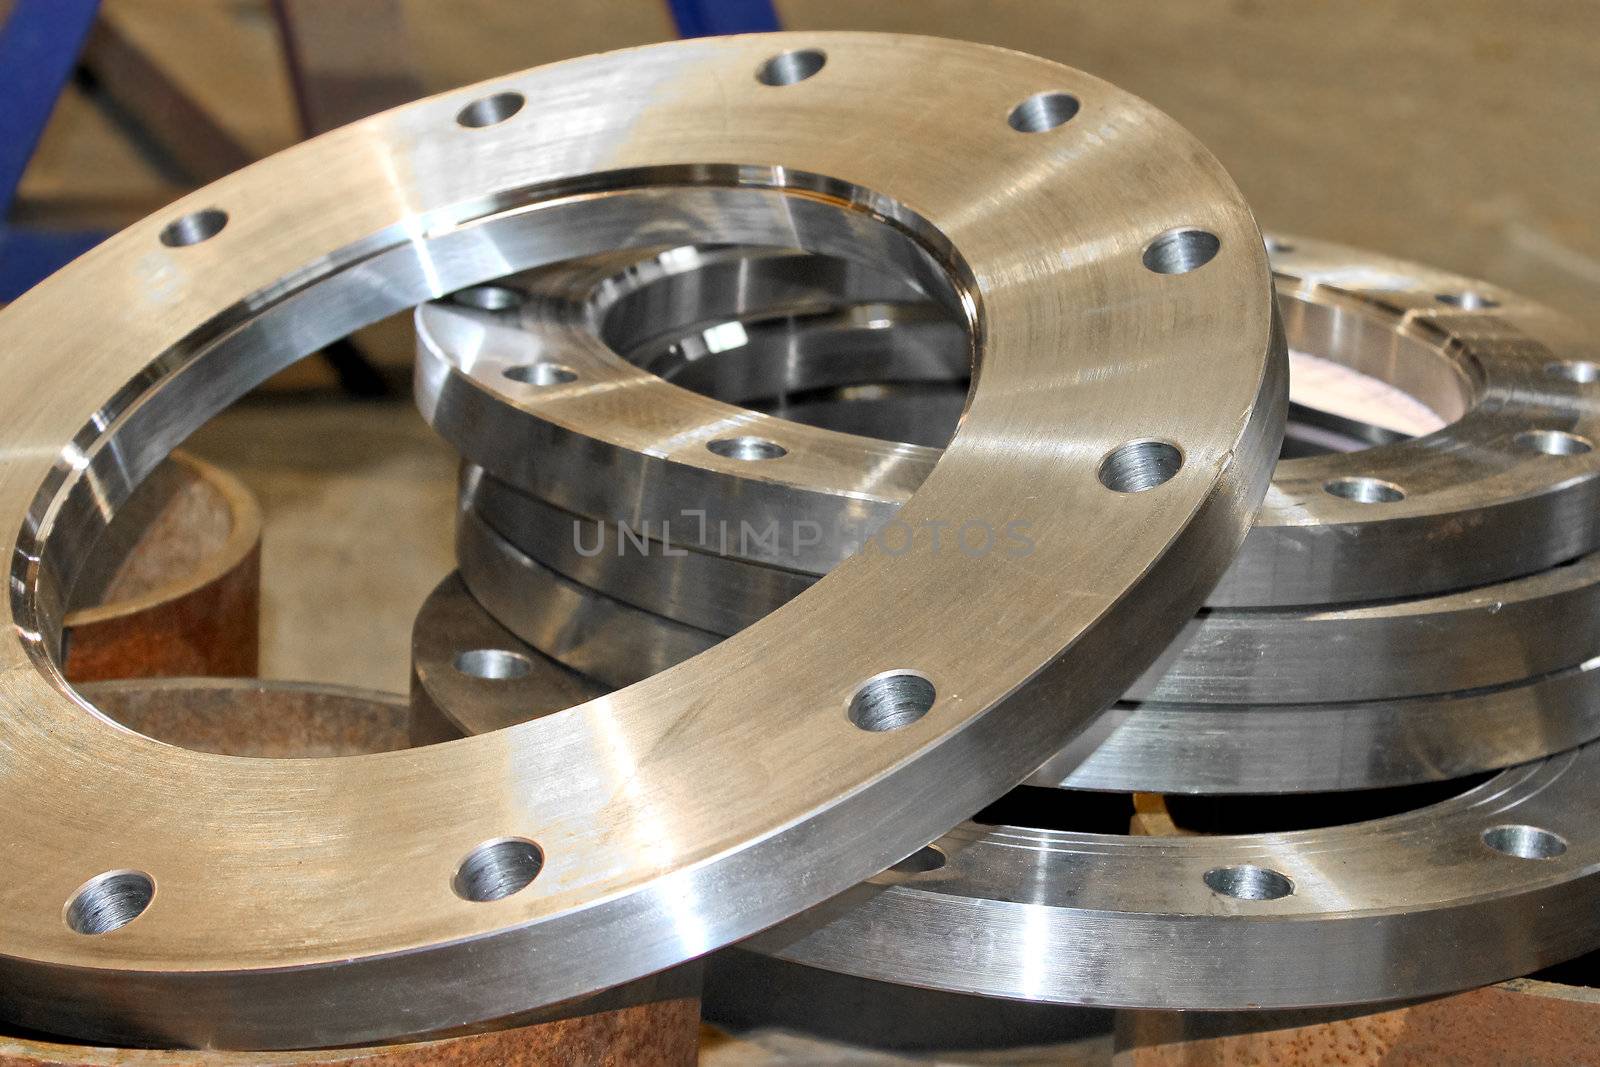 New flanges in the workshop of the plant by NickNick